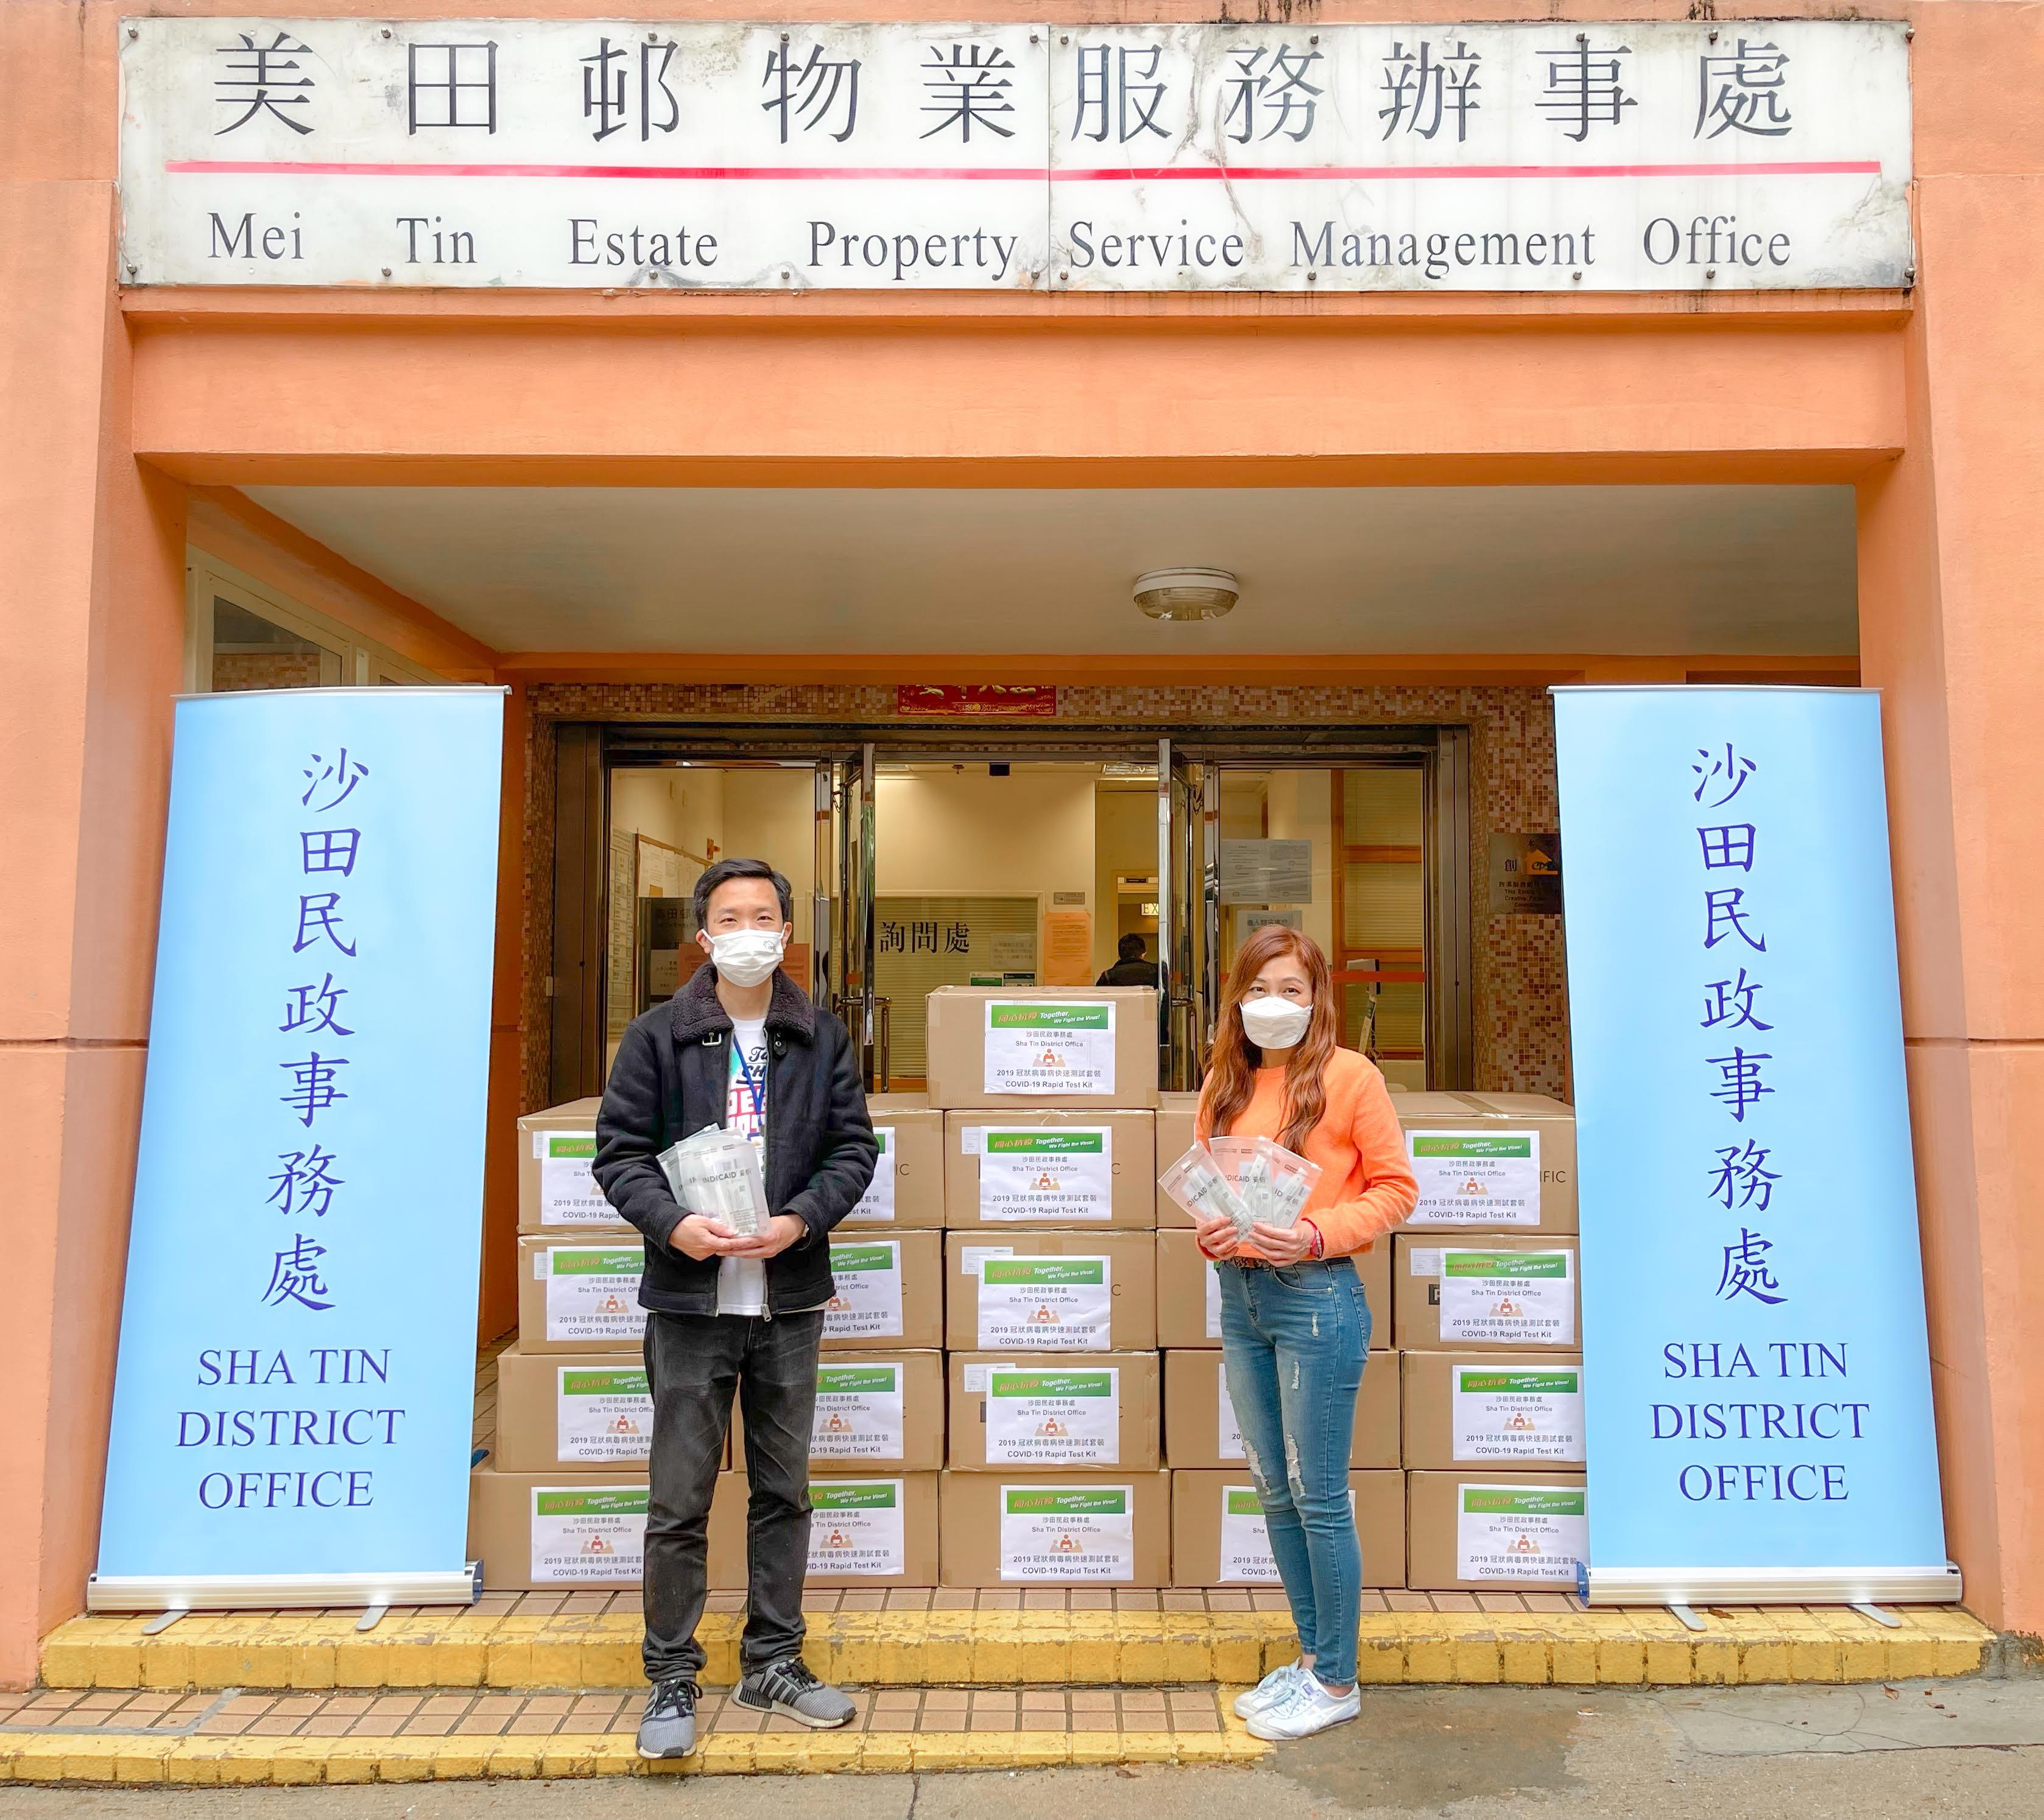 The Sha Tin District Office today (March 25) distributed COVID-19 rapid test kits to households, cleansing workers and property management staff living and working in Mei Tin Estate for voluntary testing through the Housing Department and the property management company.